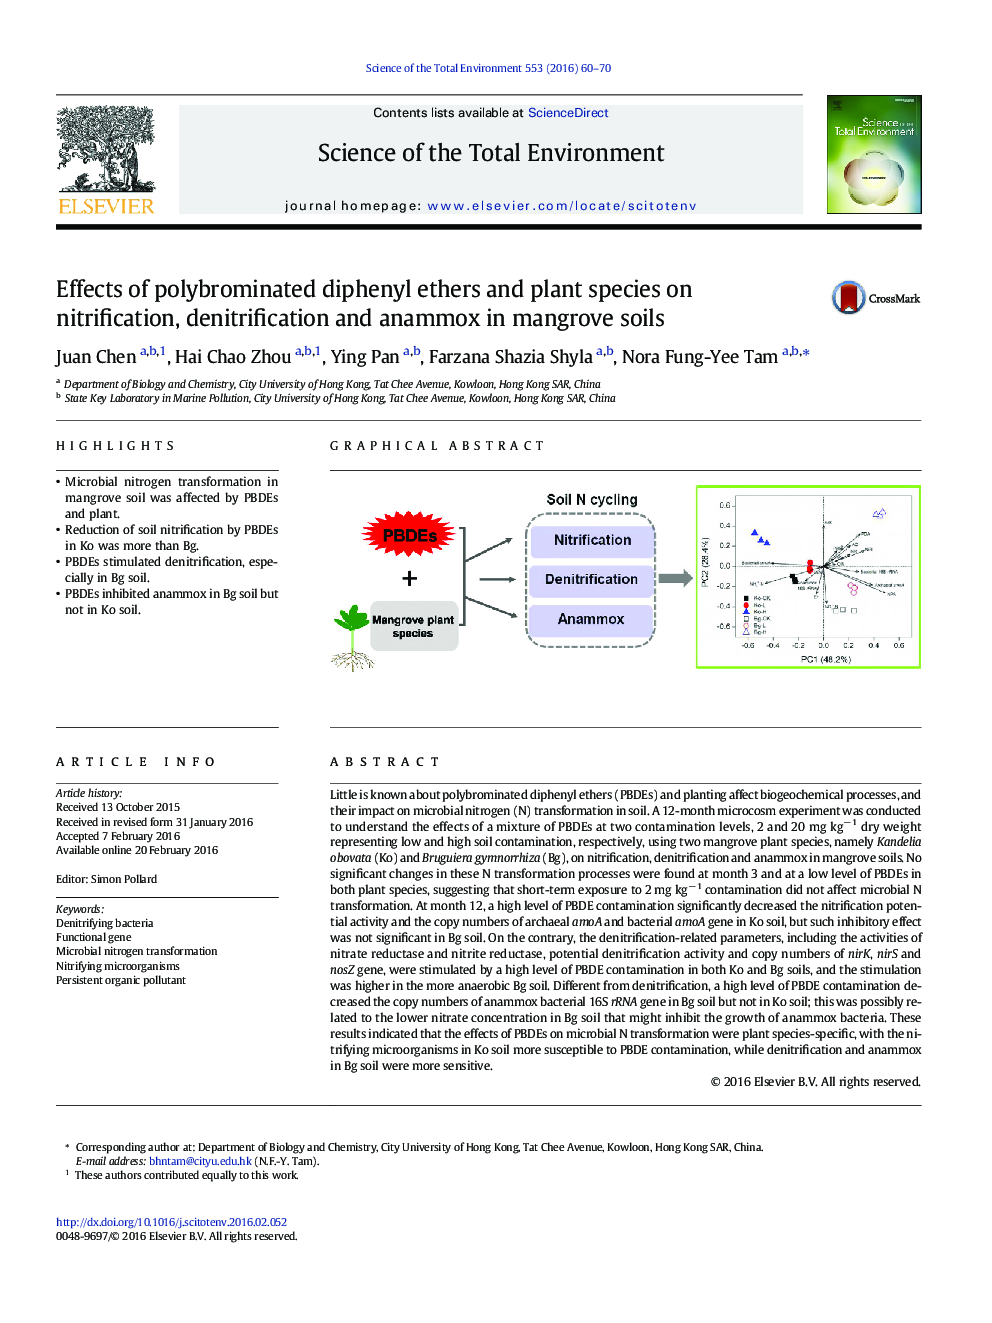 Effects of polybrominated diphenyl ethers and plant species on nitrification, denitrification and anammox in mangrove soils